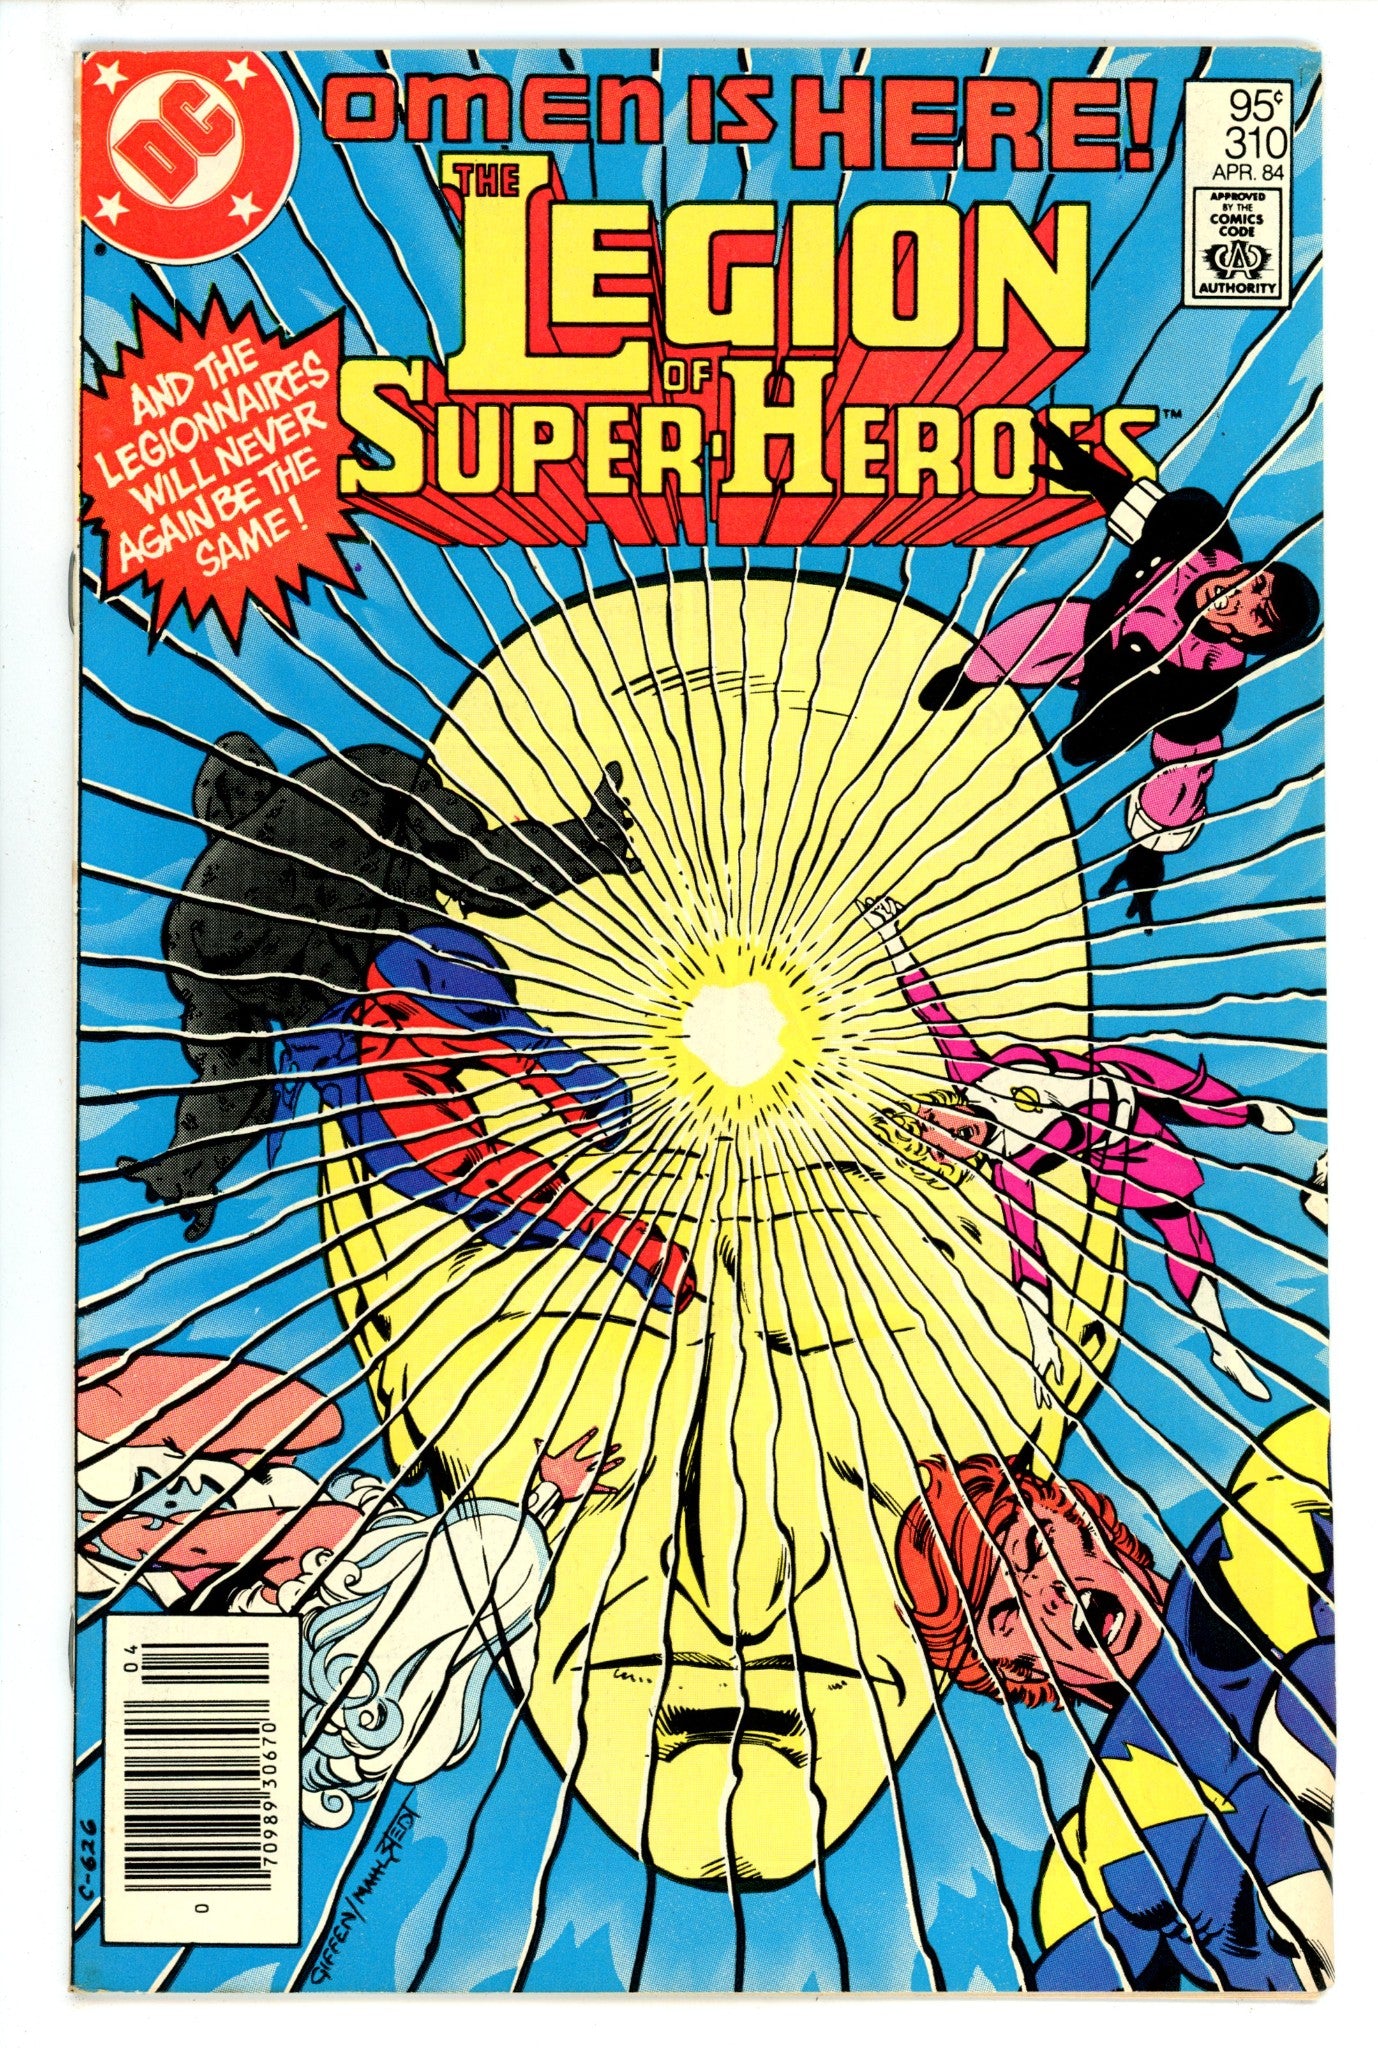 The Legion of Super-Heroes Vol 2 310 FN (6.0) (1984) Canadian Price Variant 